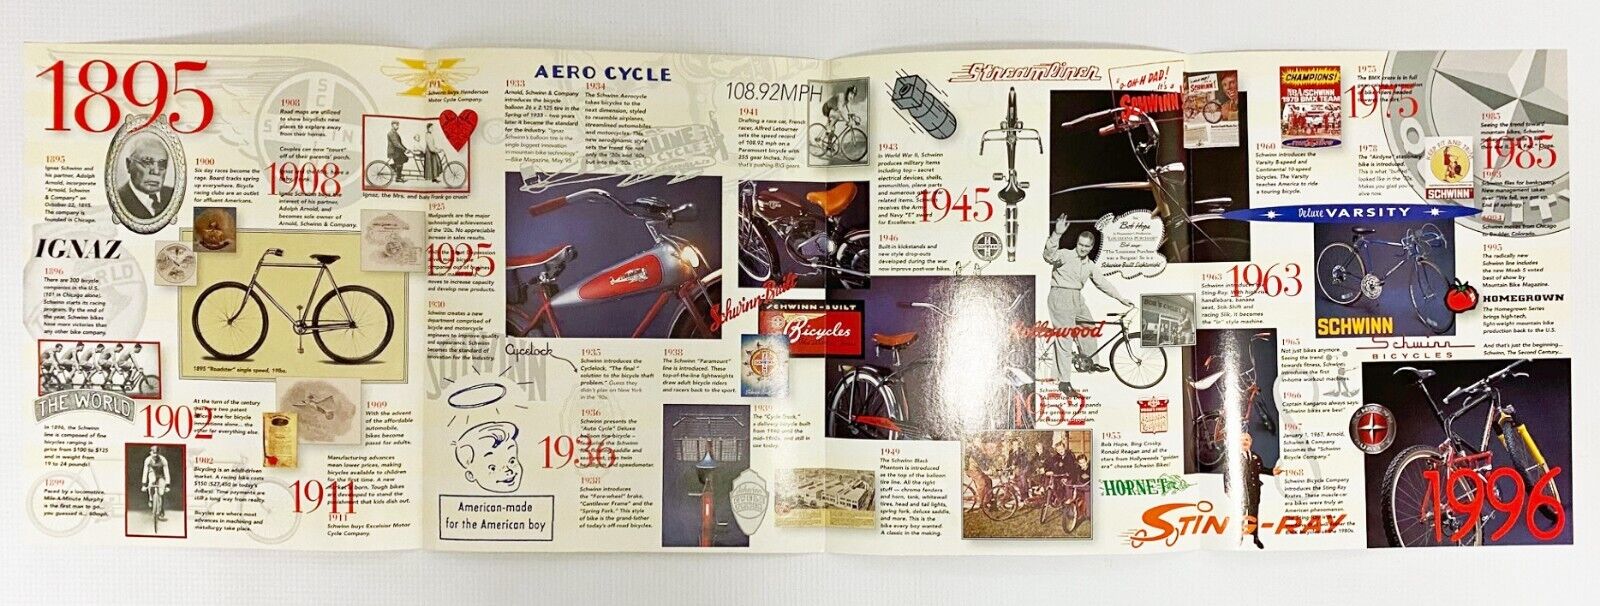 Schwinn Bicycle 1895 - 1996 100 Years Timeline Poster / Catalog - nos